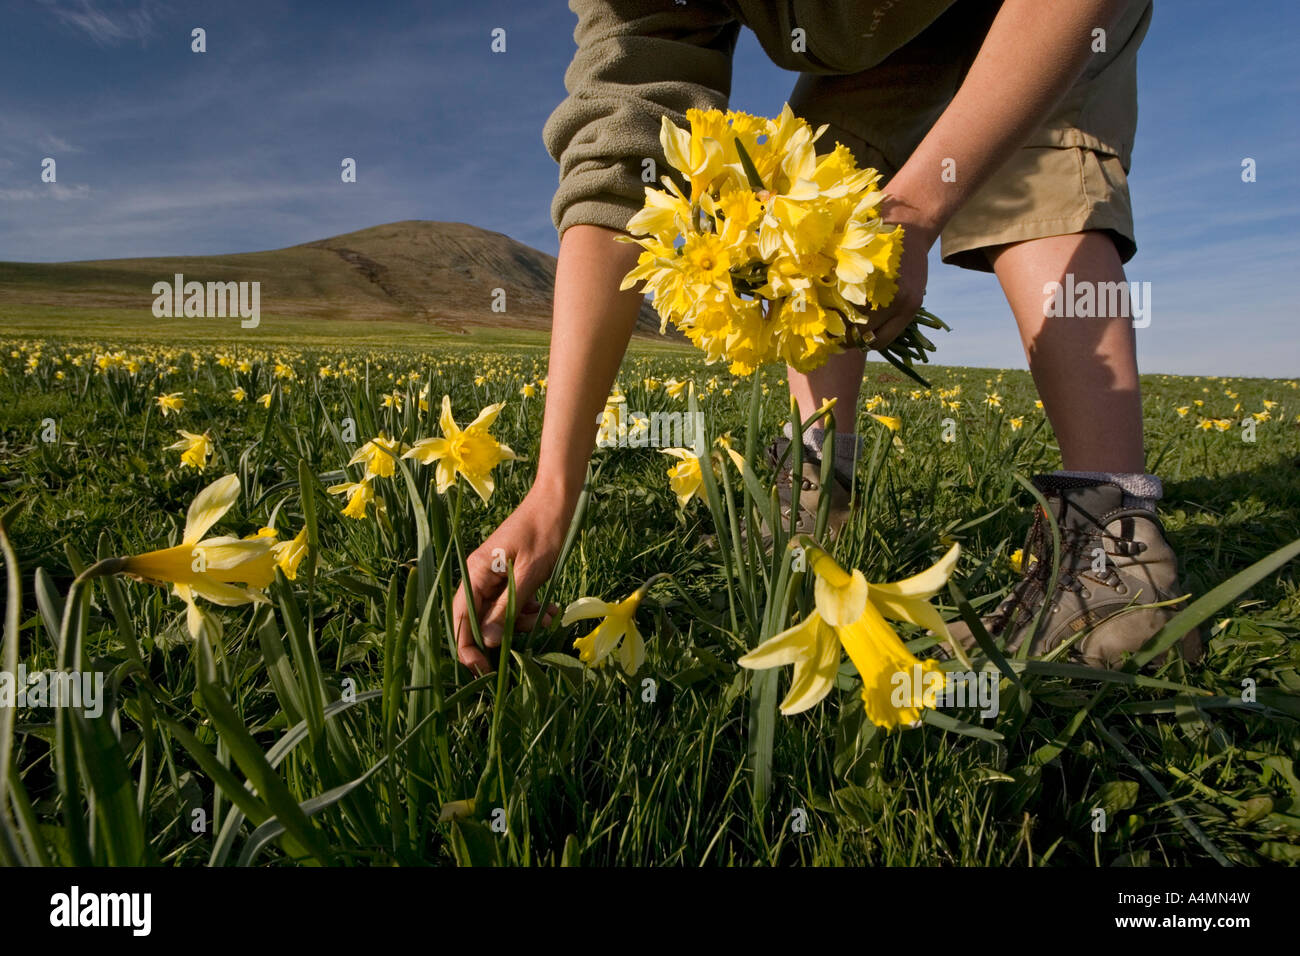 Gathering of daffodils (Narcissus pseudonarcissus). Cueillette de jonquilles (Narcissus pseudonarcissus). Stock Photo